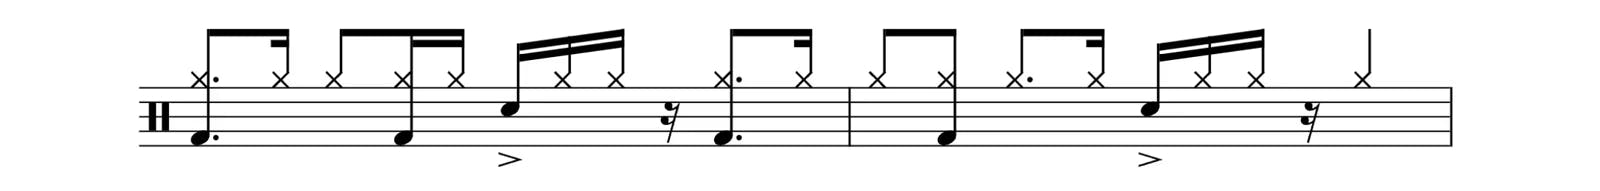 The notation adding in hi-hat to the snare and kick